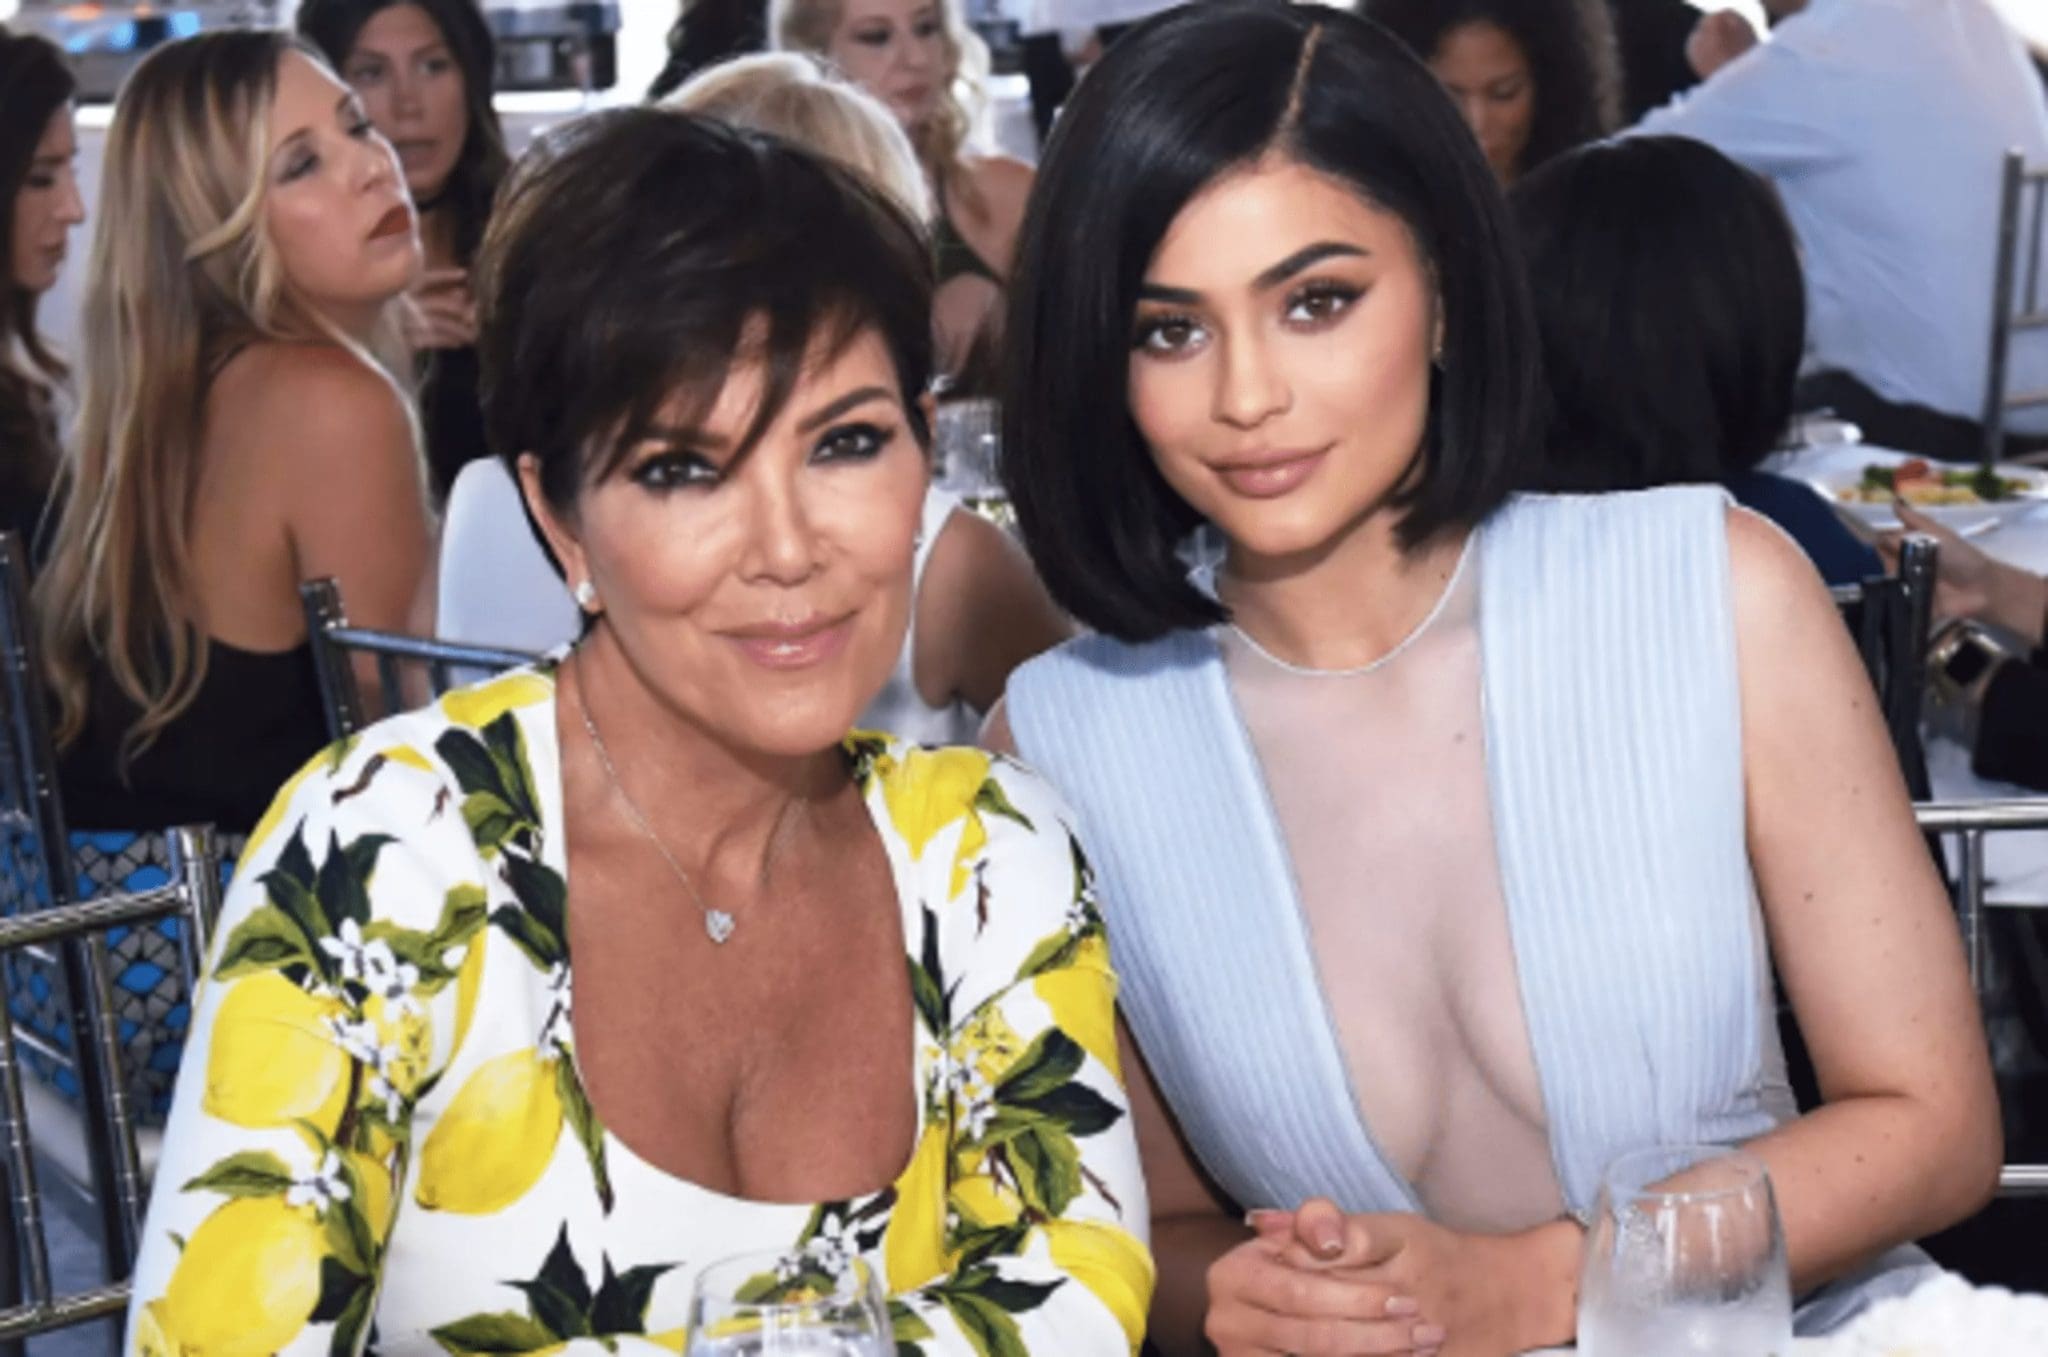 Ahead Of Her Death, Kris Jenner Has Revealed That She Wants To Be Cremated And Her Ashes Turned Into Necklaces For Her Kids